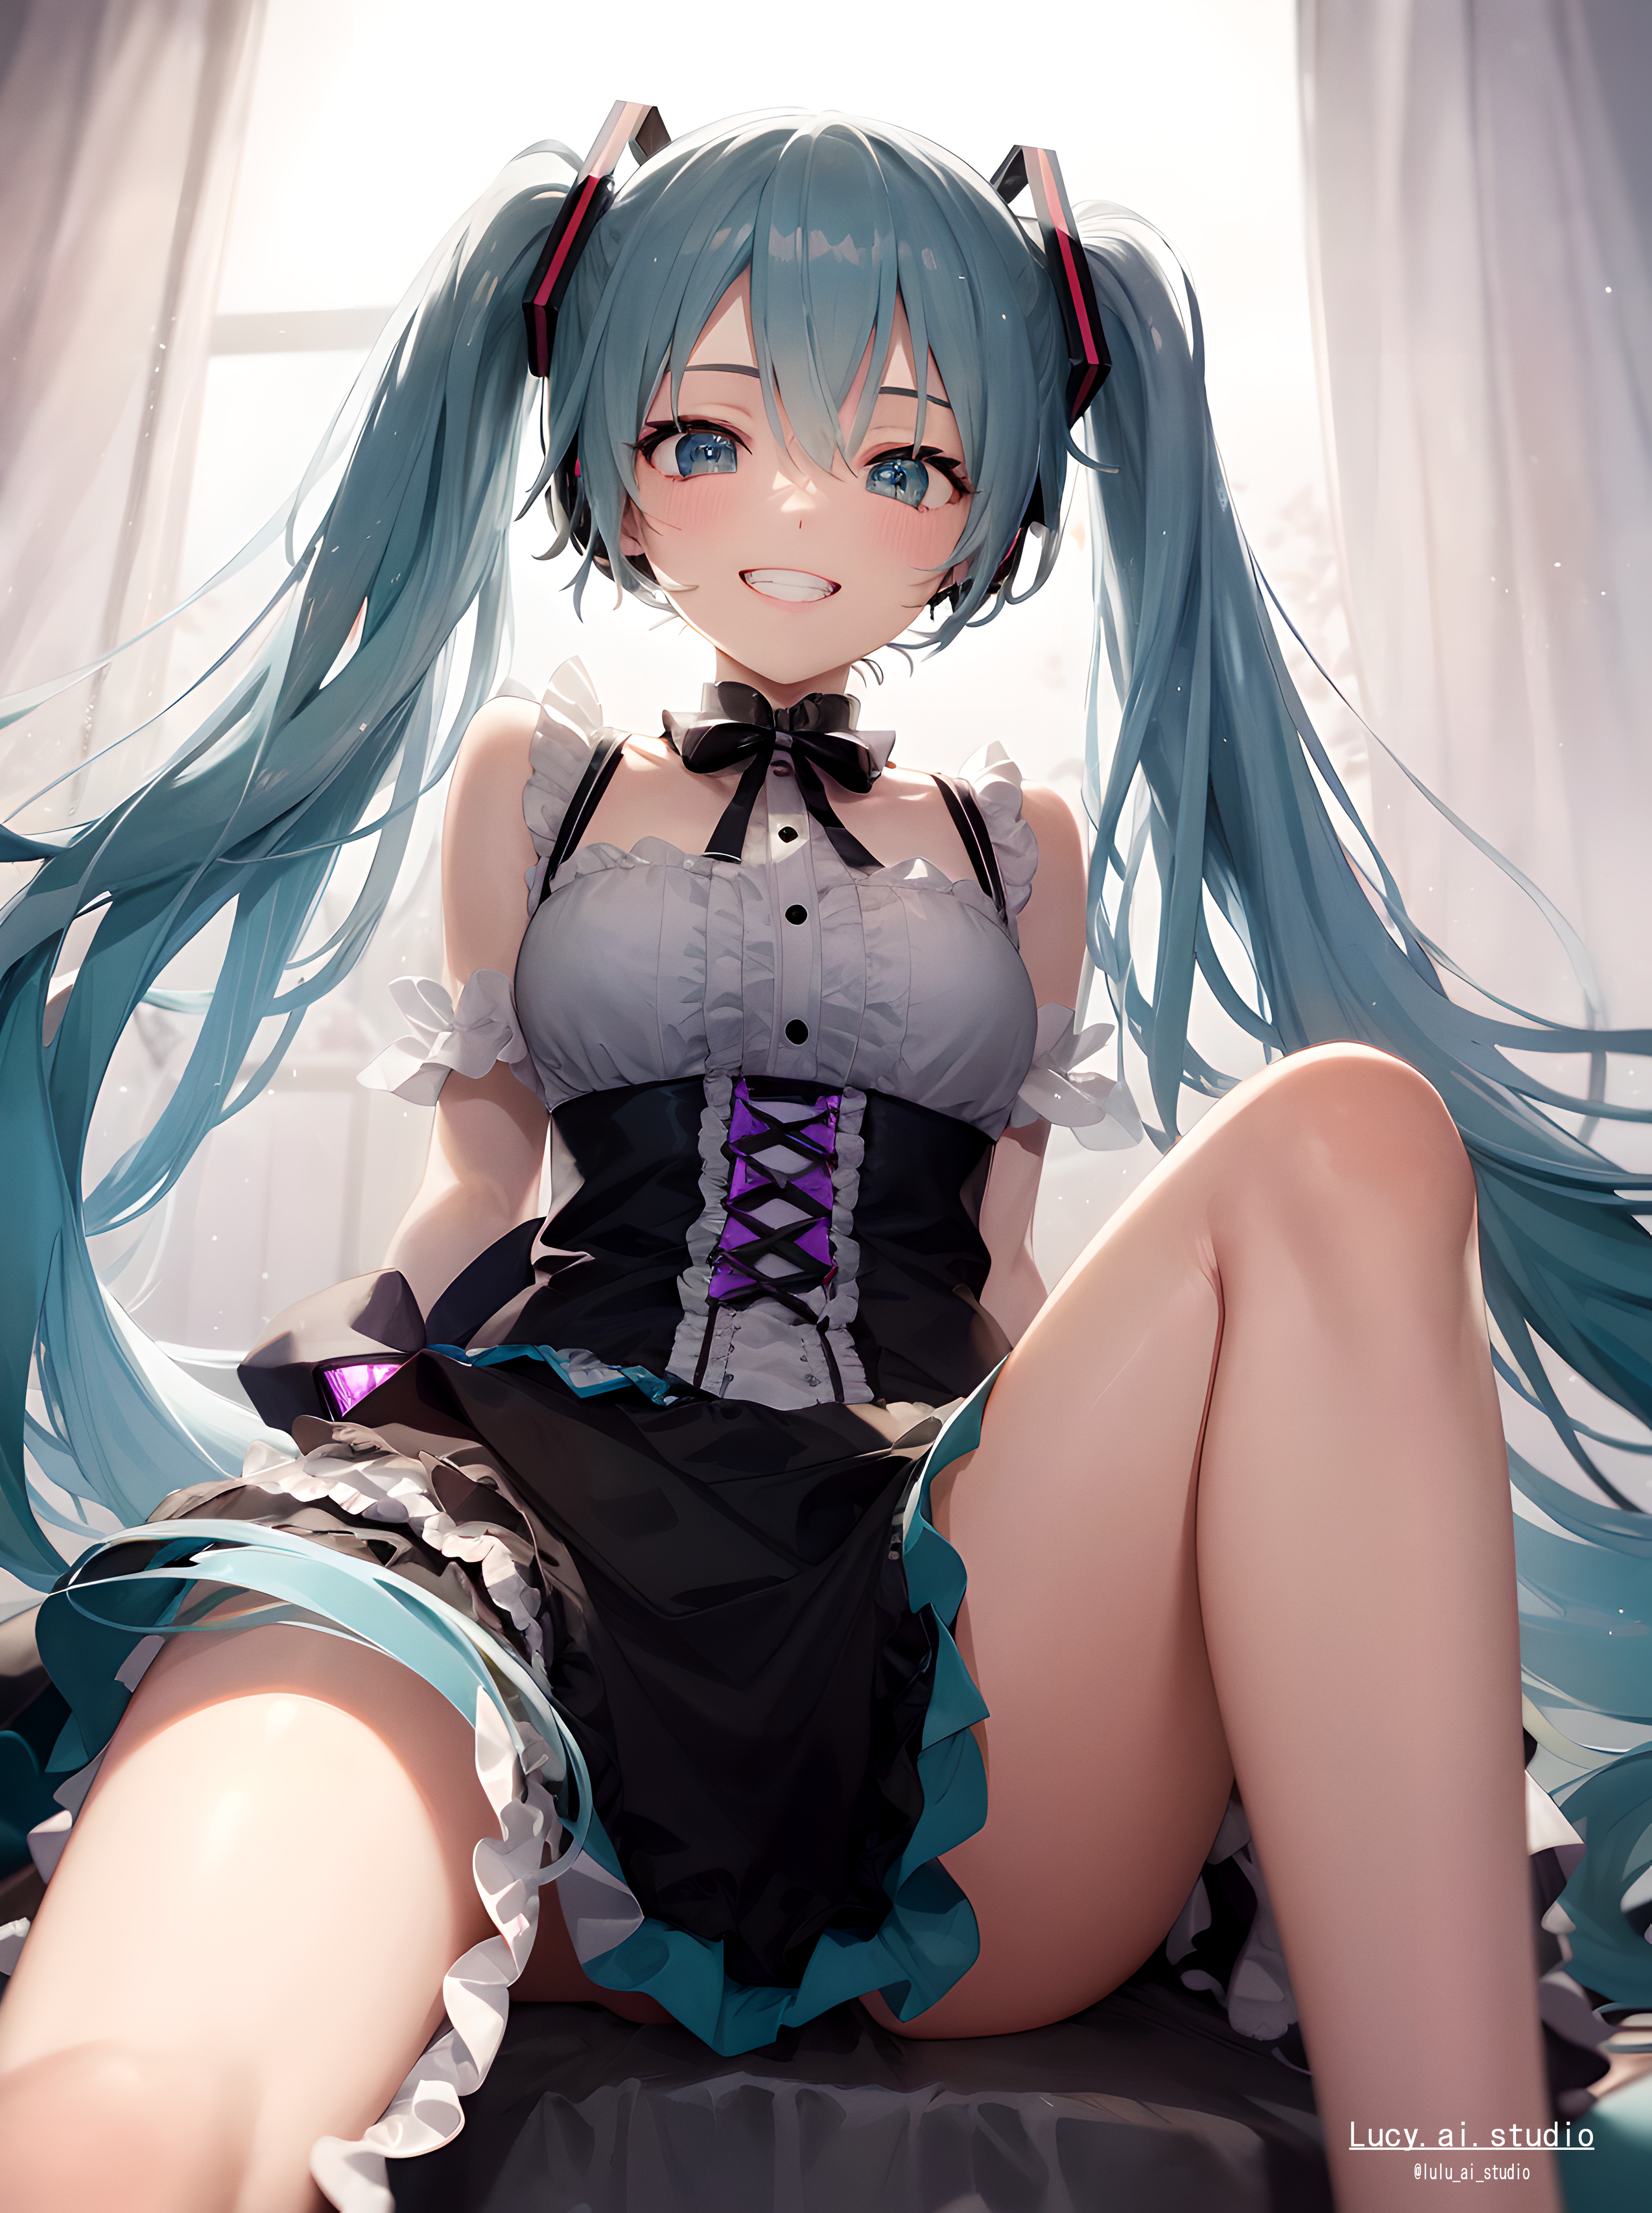 Anime Anime Girls Vocaloid Hatsune Miku Ai Art Lucy Artist Vertical Twintails Smiling Maid Outfit Bo 3584x4800